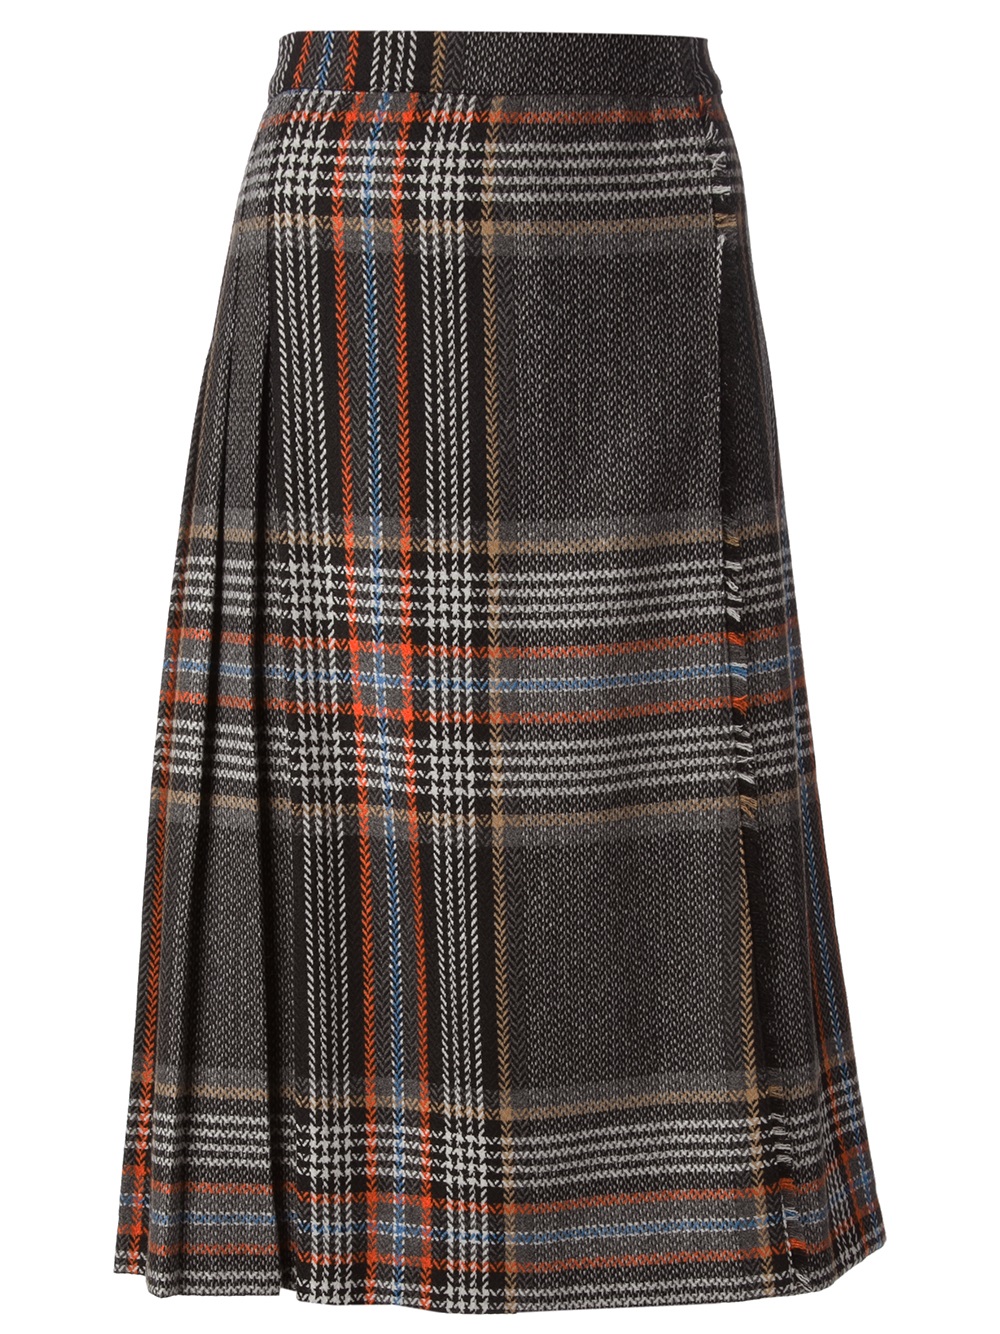 Lyst - Msgm Pleated Plaid Skirt in Gray